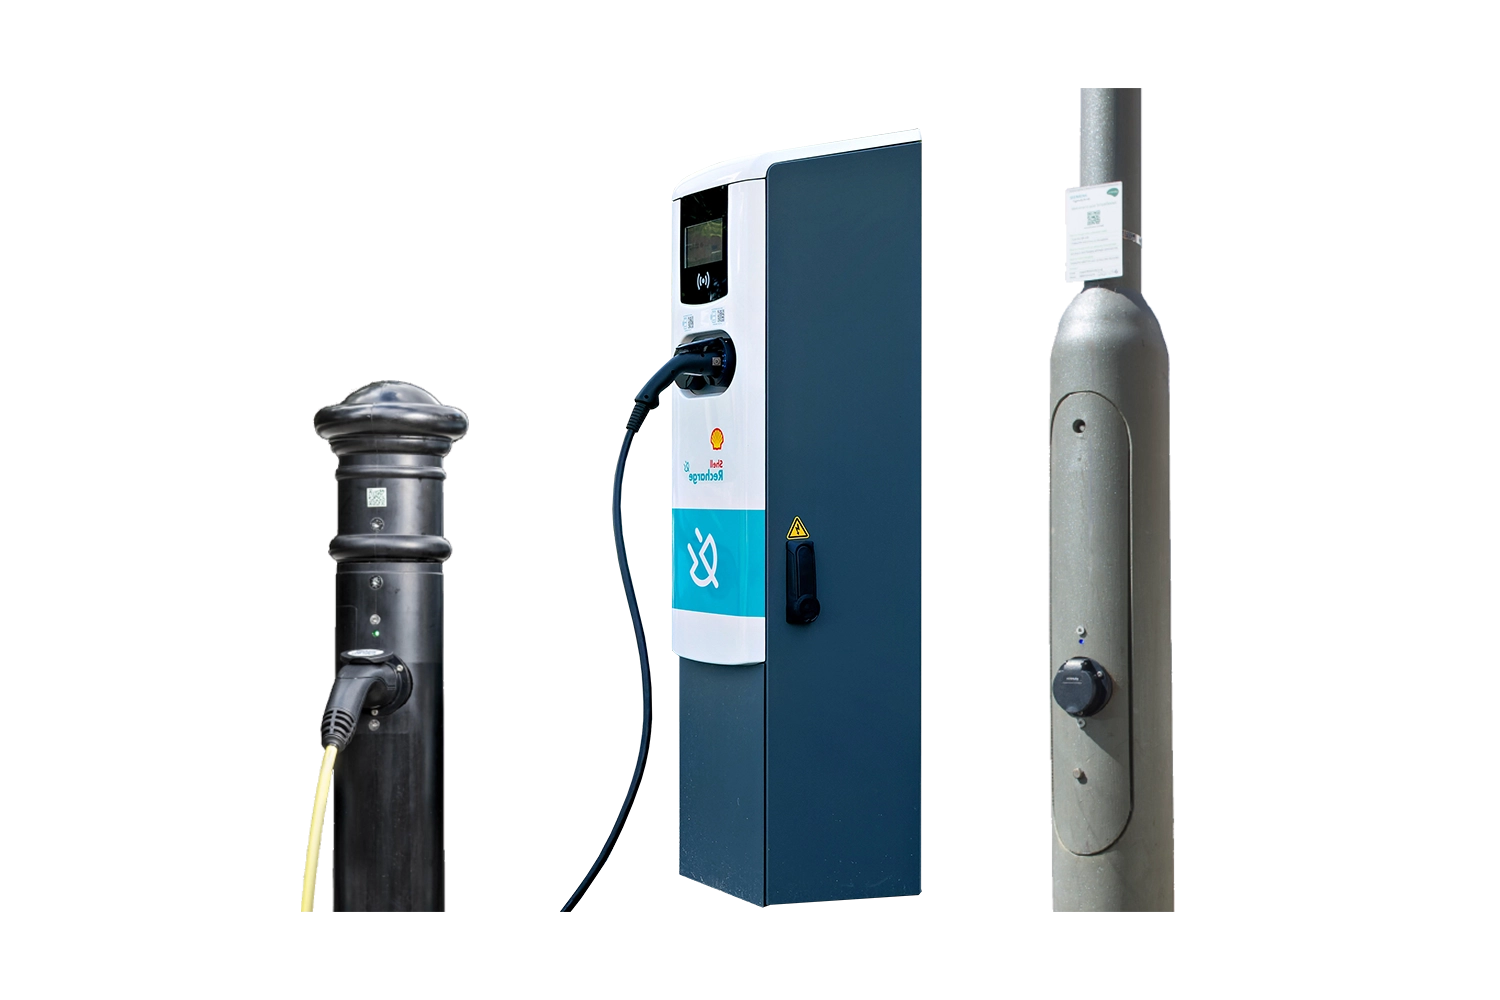 ubitricity prodcut portfolio of public charging solutions with EV lamppost charge points, fast charger sand bollard charging stations.